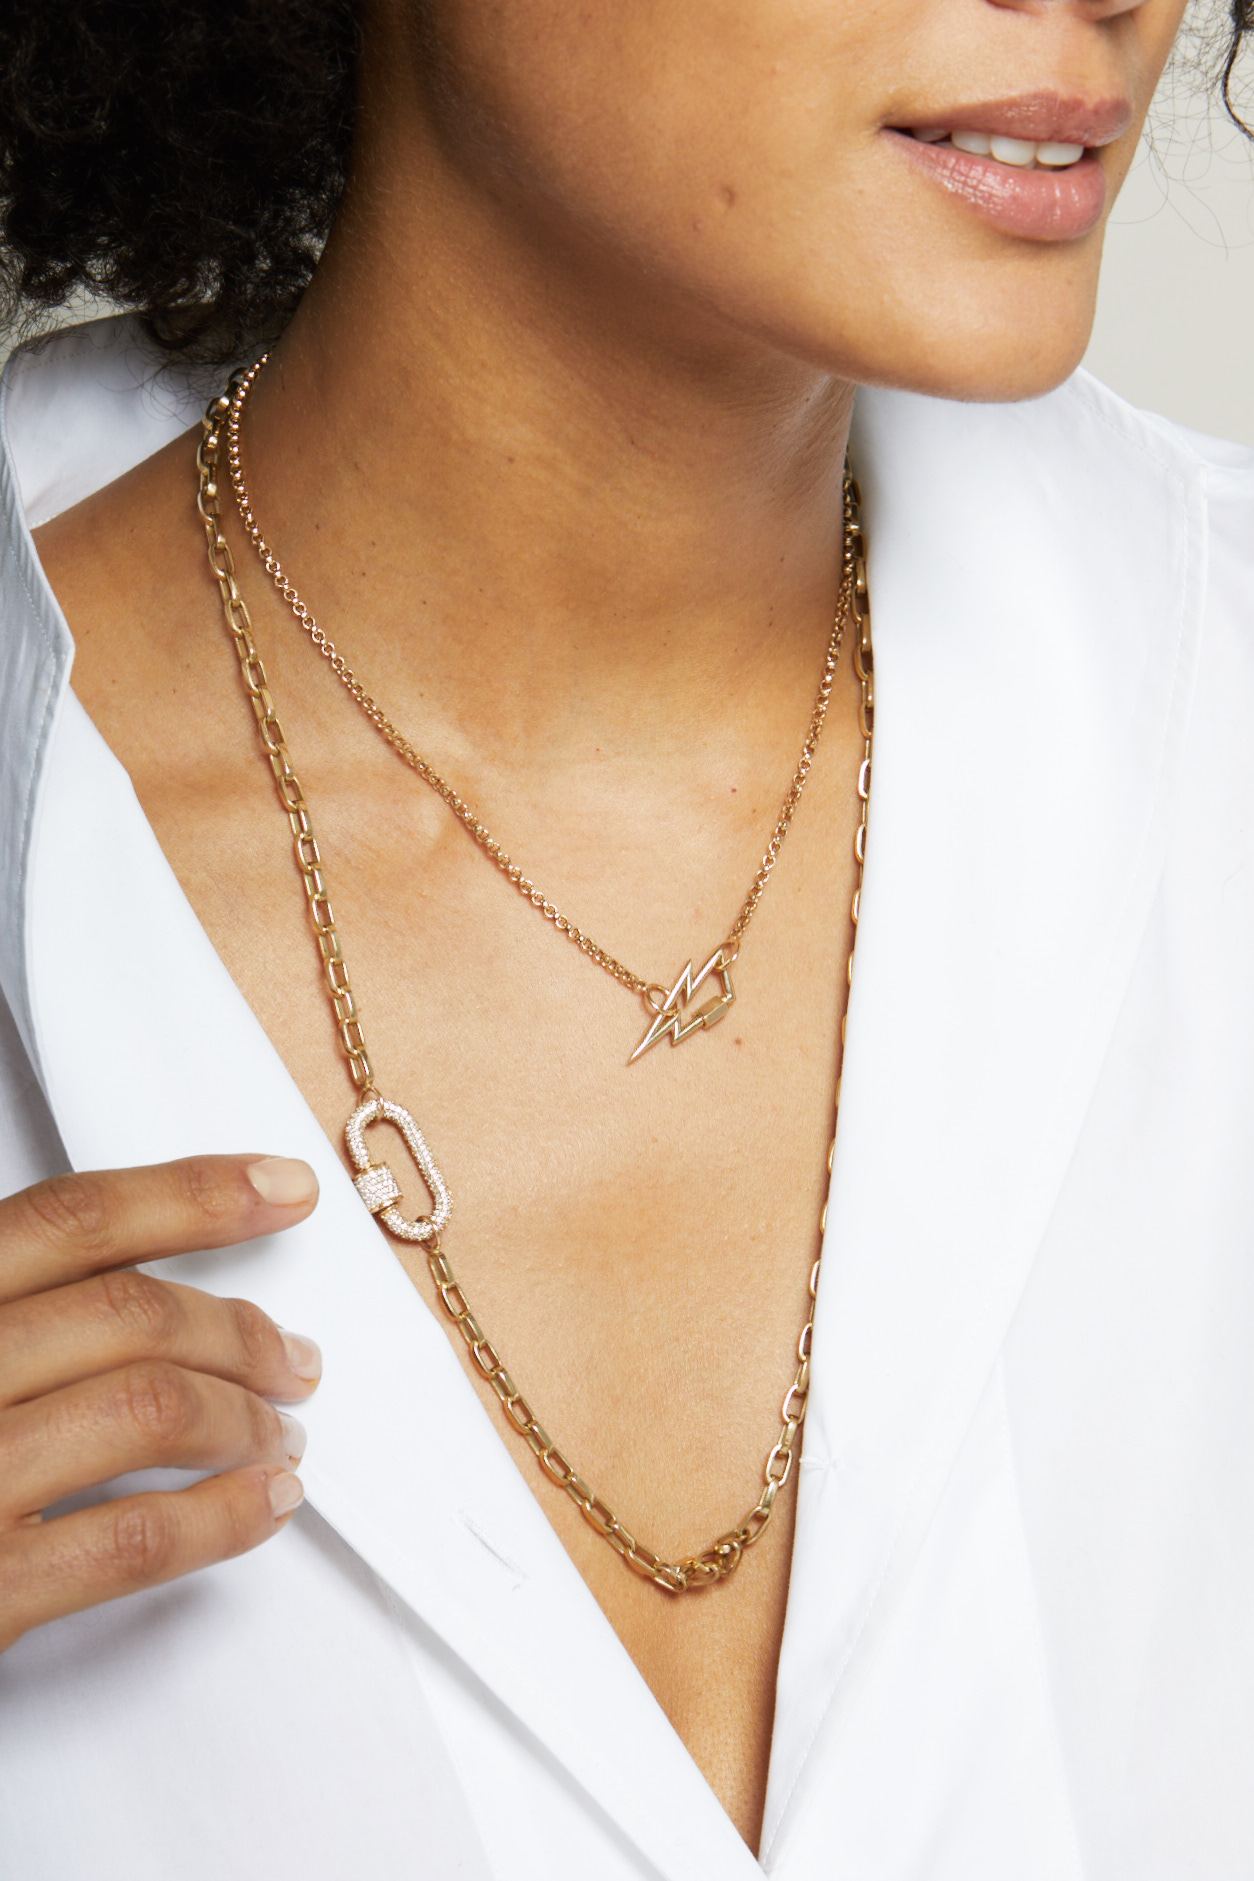 Close up of woman's decolletage wearing lightning bolt charm necklace